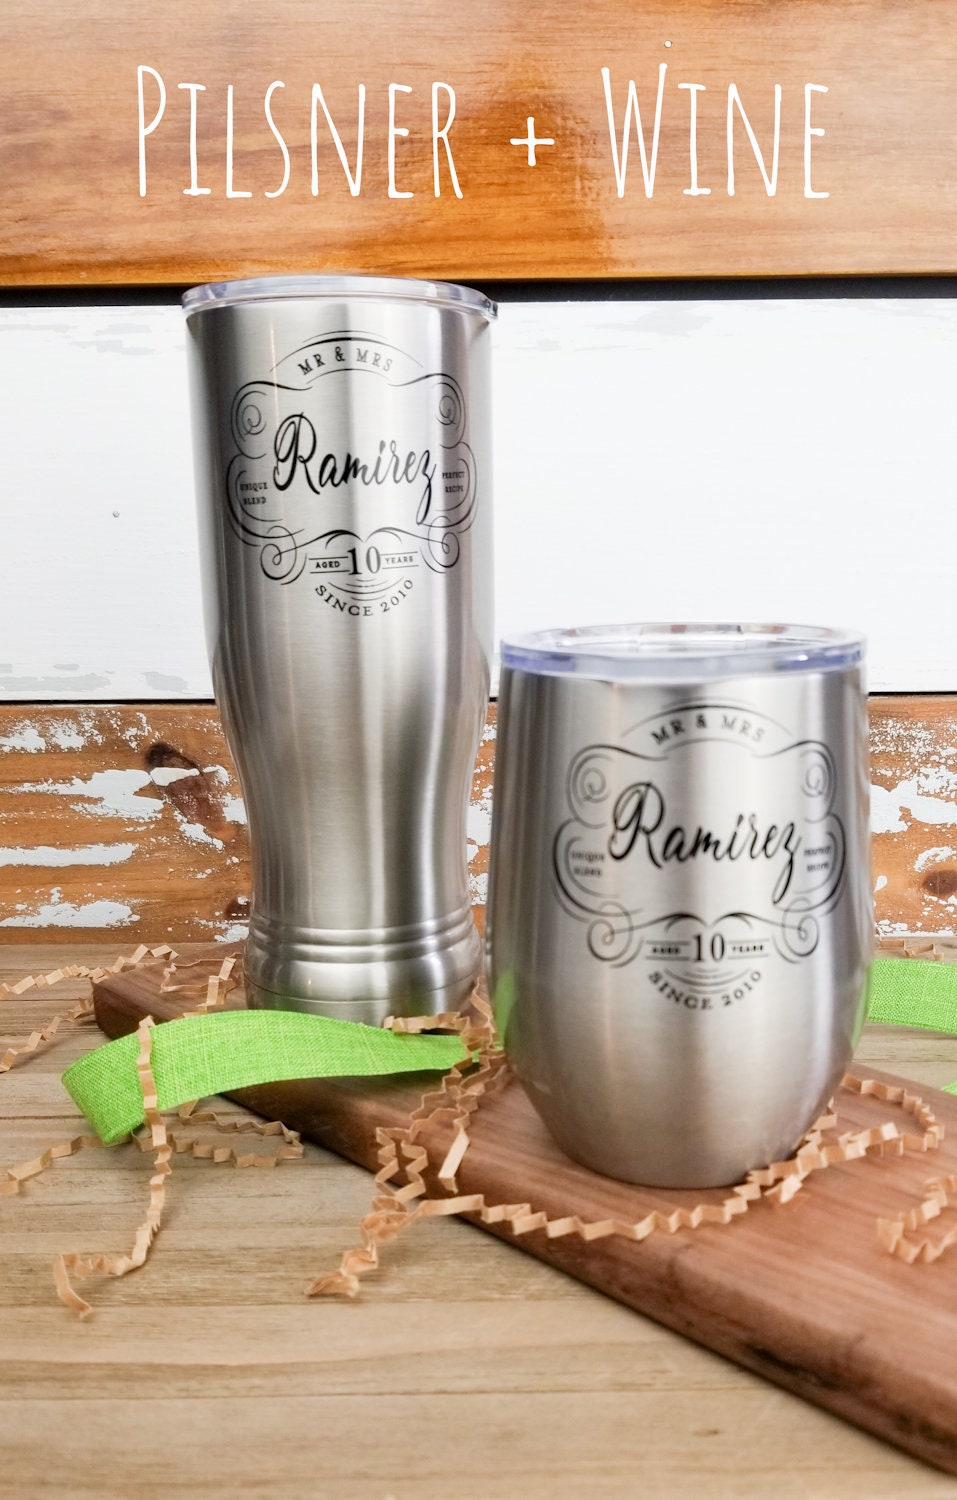 Anniversary Gift For Couples, Personalized SS Pilsner + Wine Tumbler Set, Tin Anniversary gift, 10th Anniversary Gift